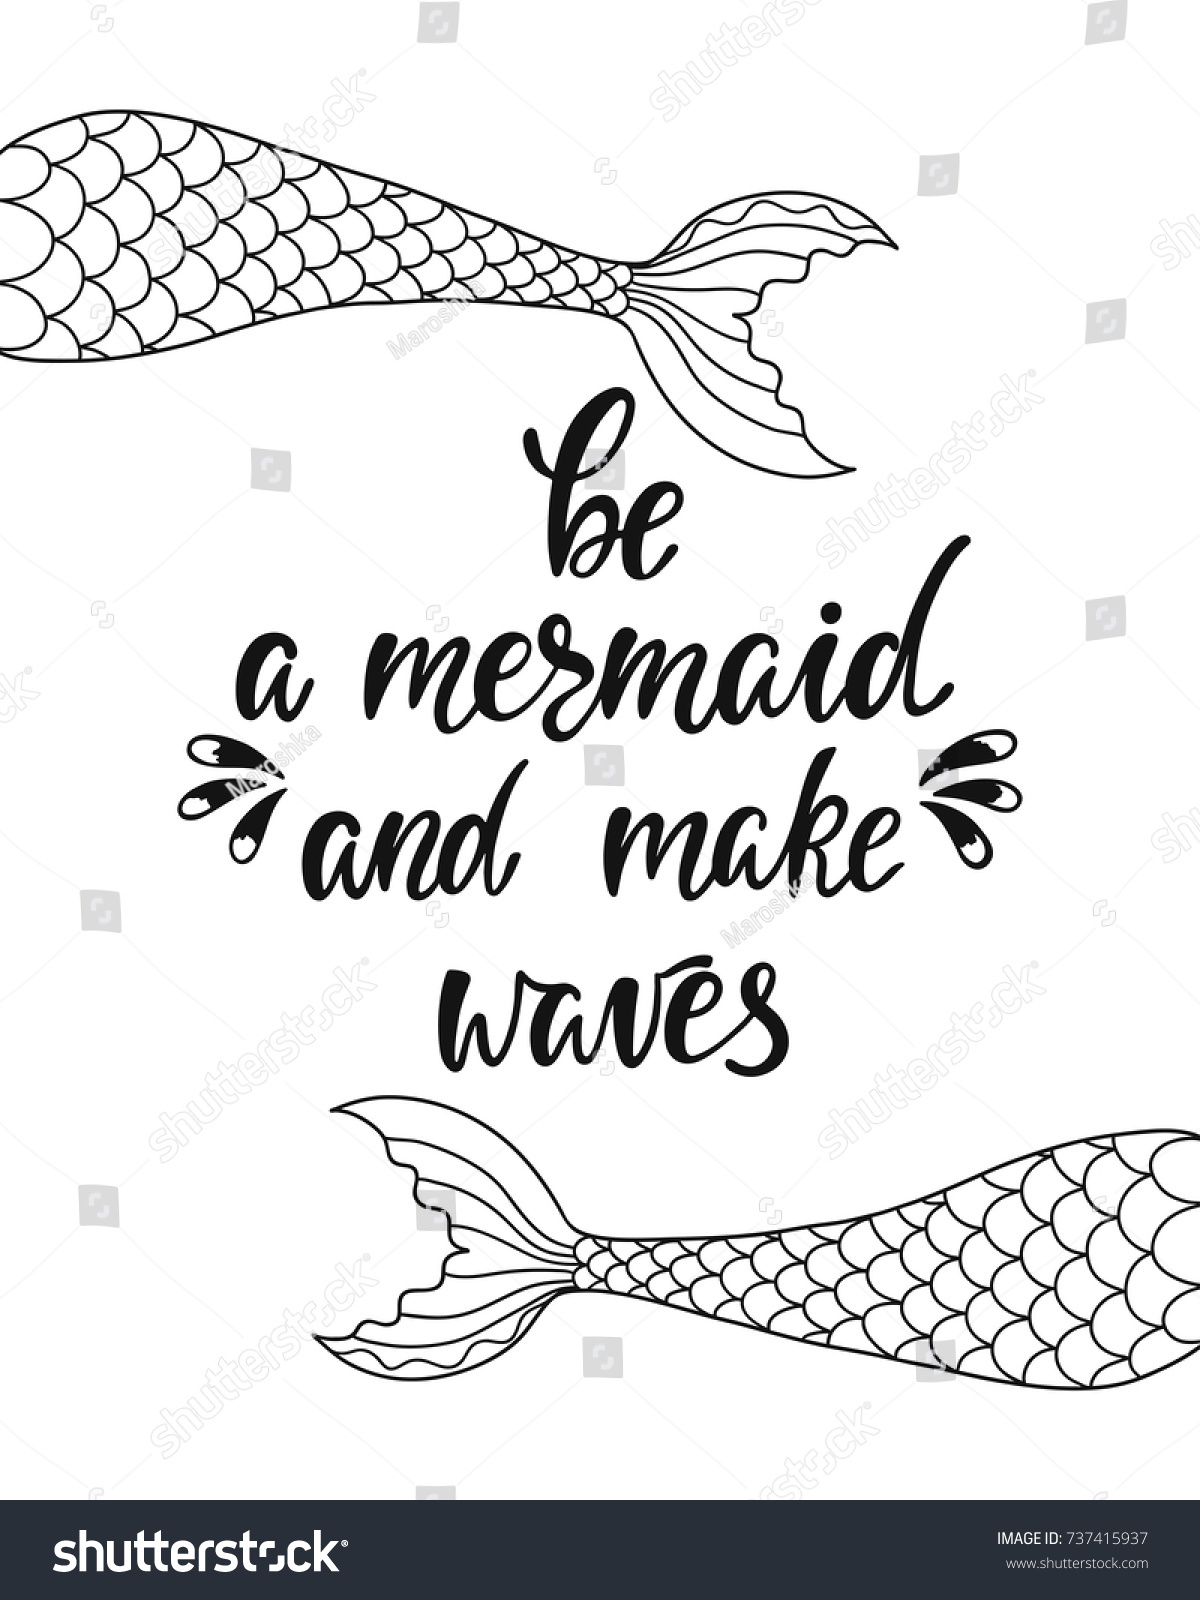 Be Mermaid Make Waves Inspirational Quote Stock Vector (Royalty Free ...